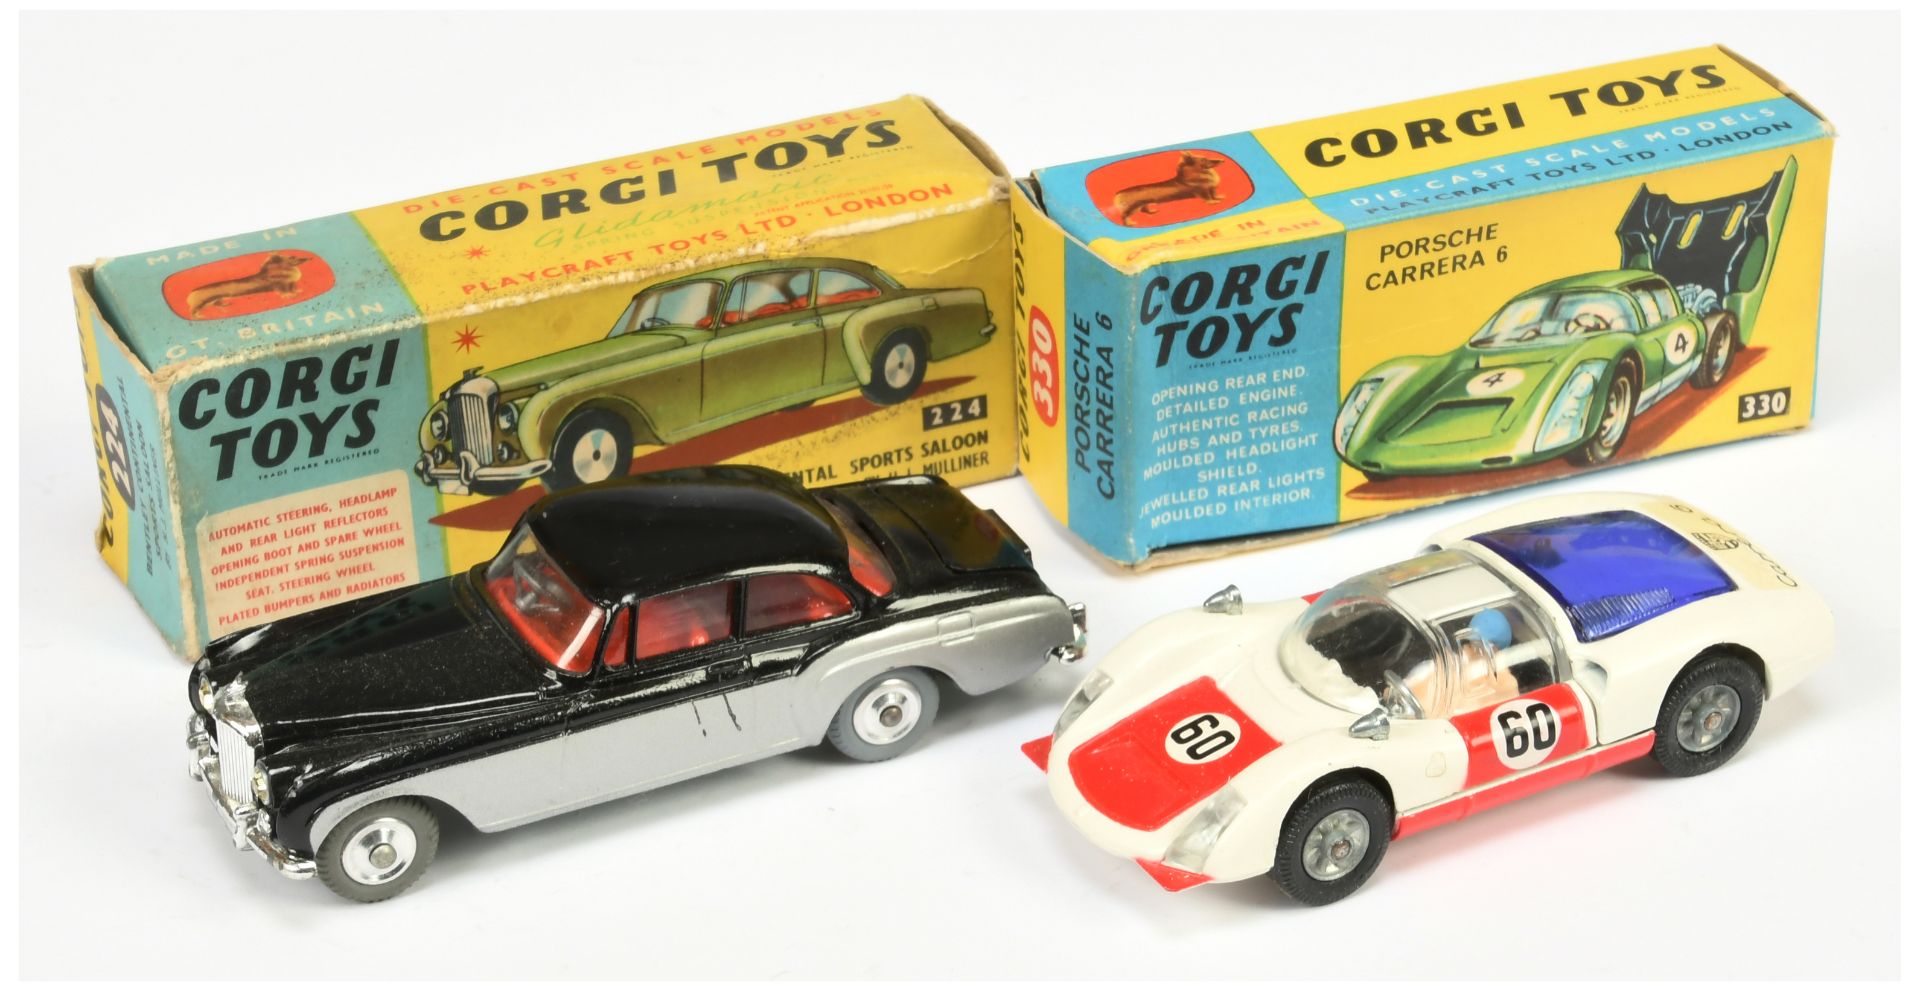 Corgi Toys 224 Bentley Continental Sports Saloon - Two-Tone Black and Silver, red interior, chrom...